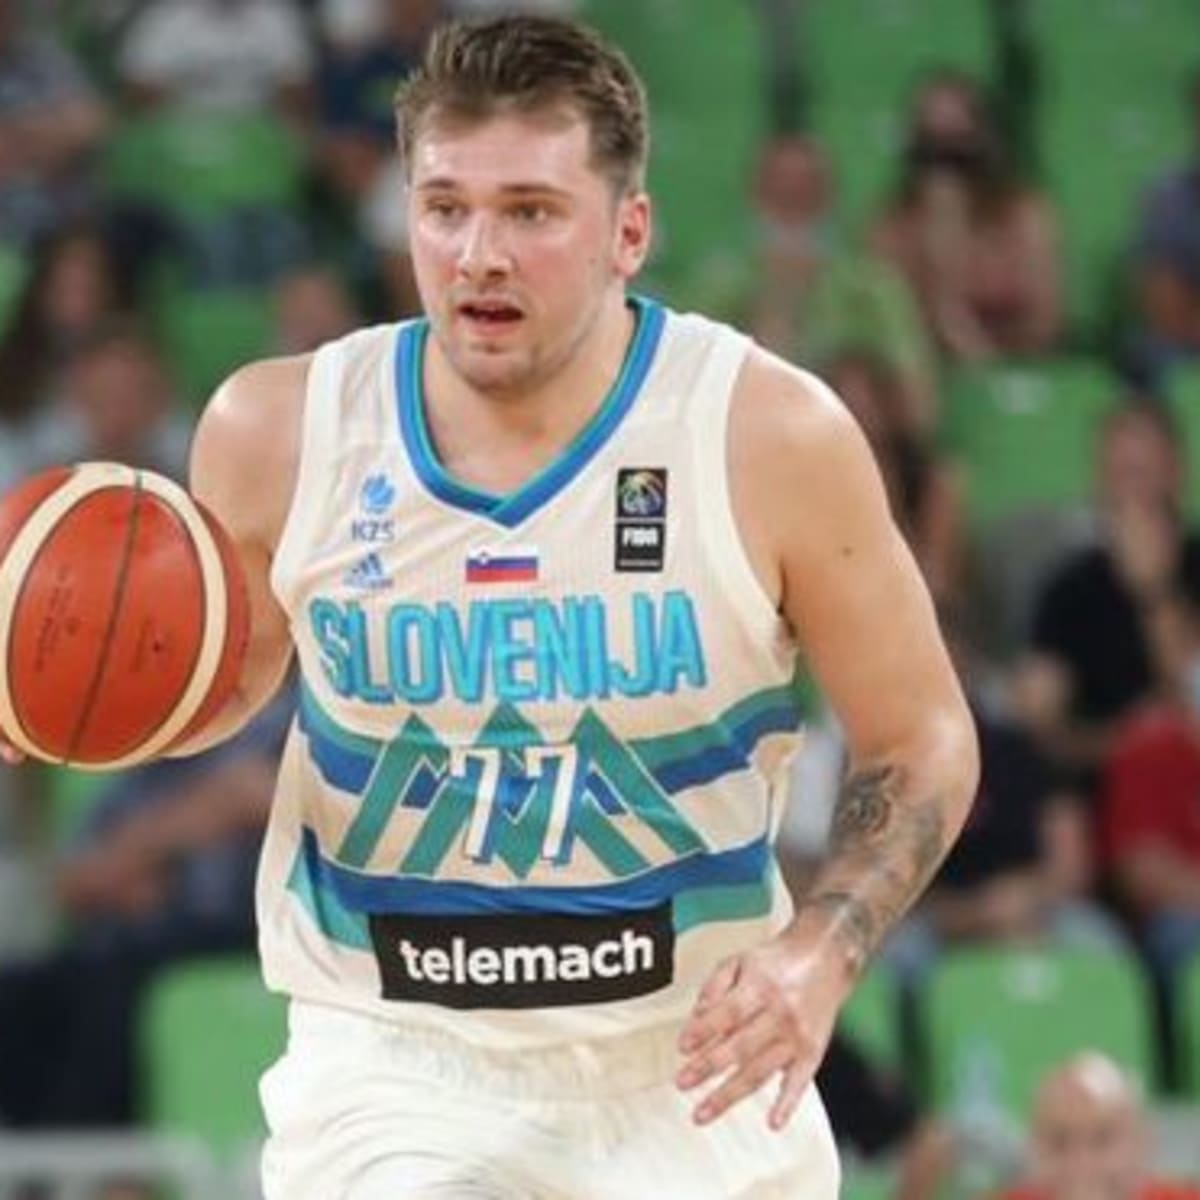 Olympics: Check Out The Photo Luka Doncic Tweeted After Slovenia